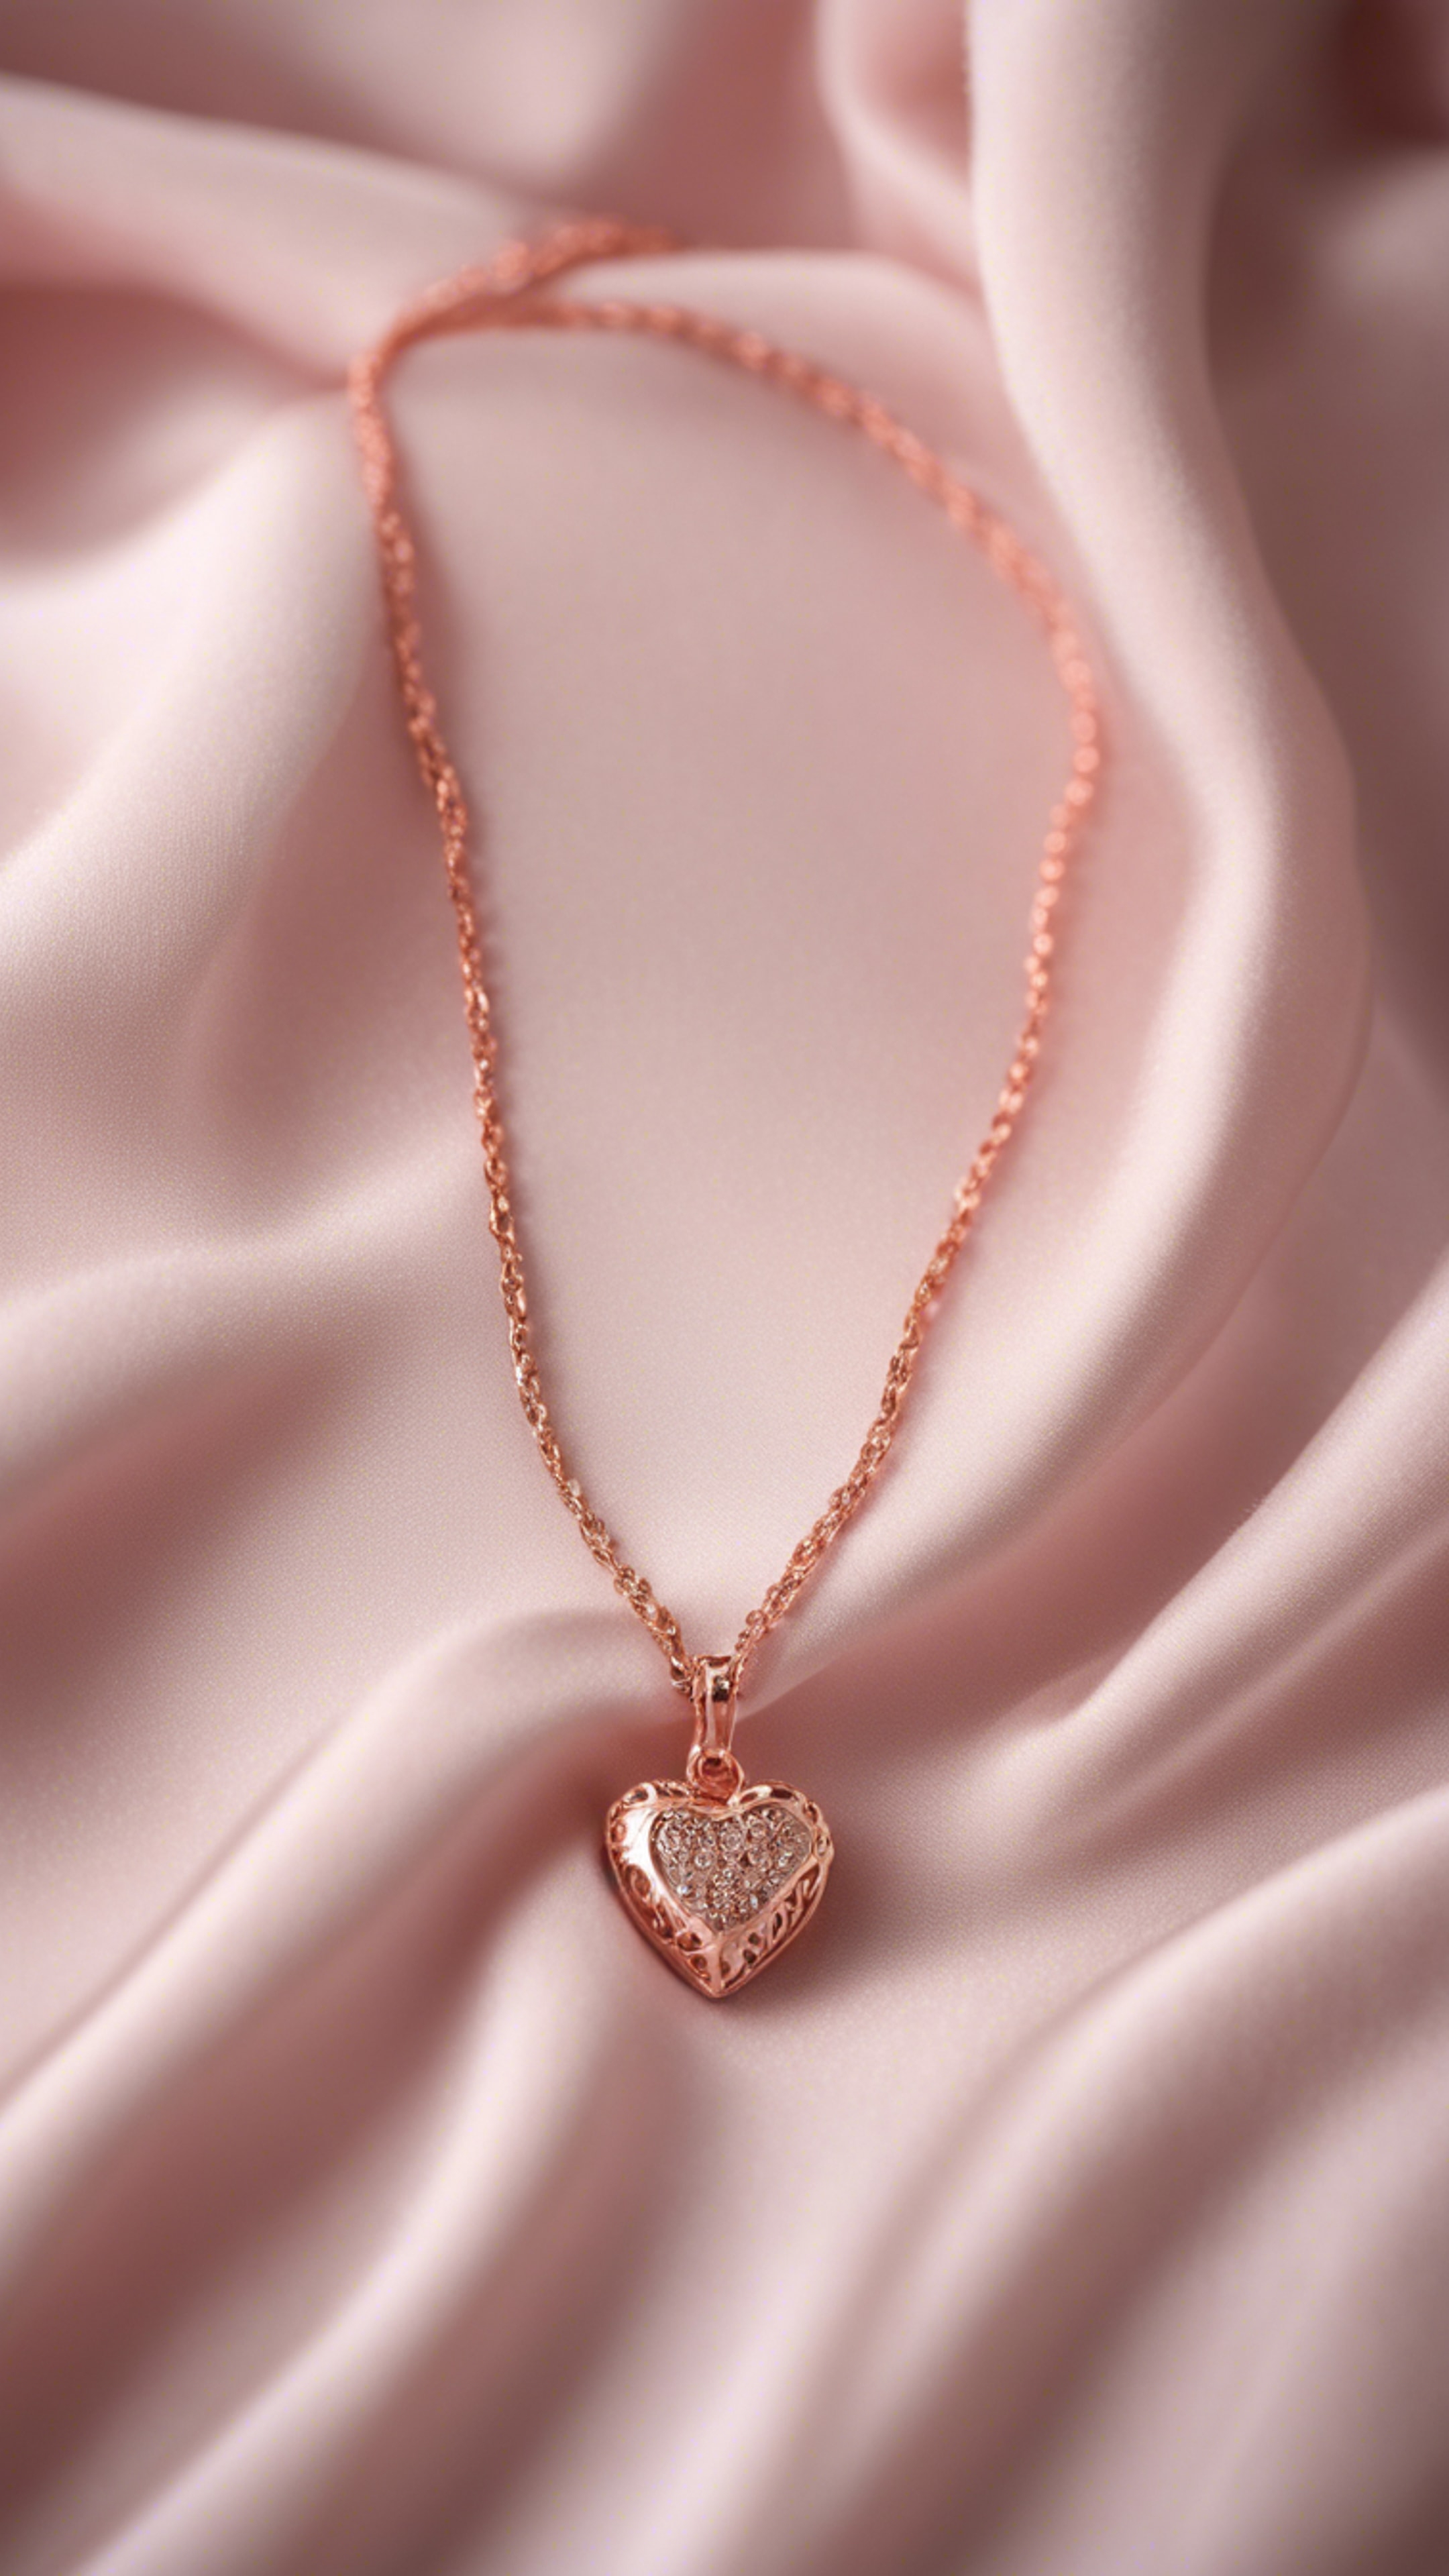 A delicate rose gold chain necklace with a small heart pendant, displayed on a soft pink satin fabric. Tapet[1bffd5f9a0f0499fae91]